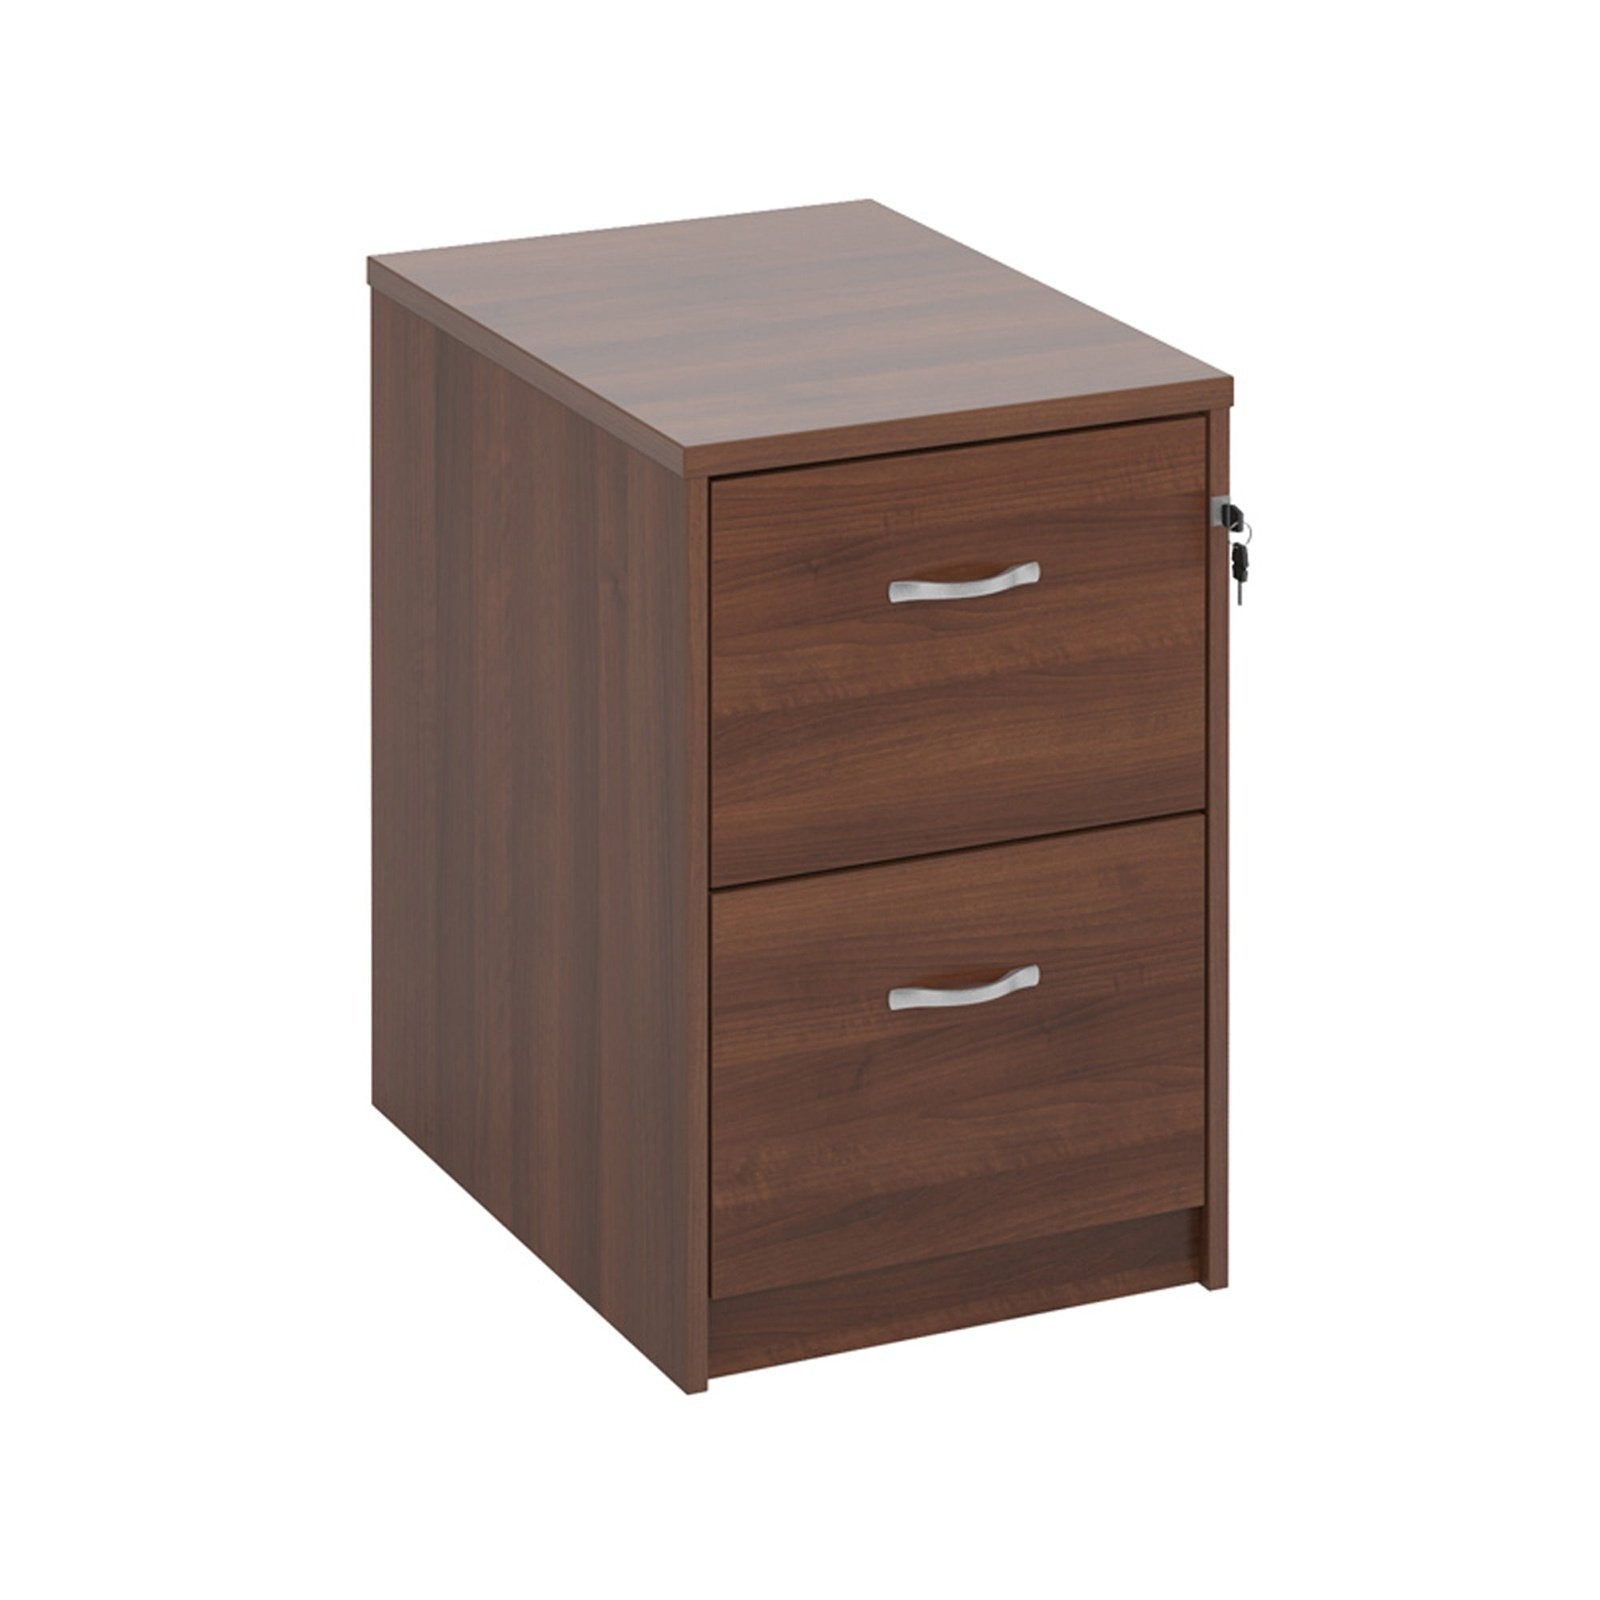 Wooden filing cabinet with silver handles - Office Products Online